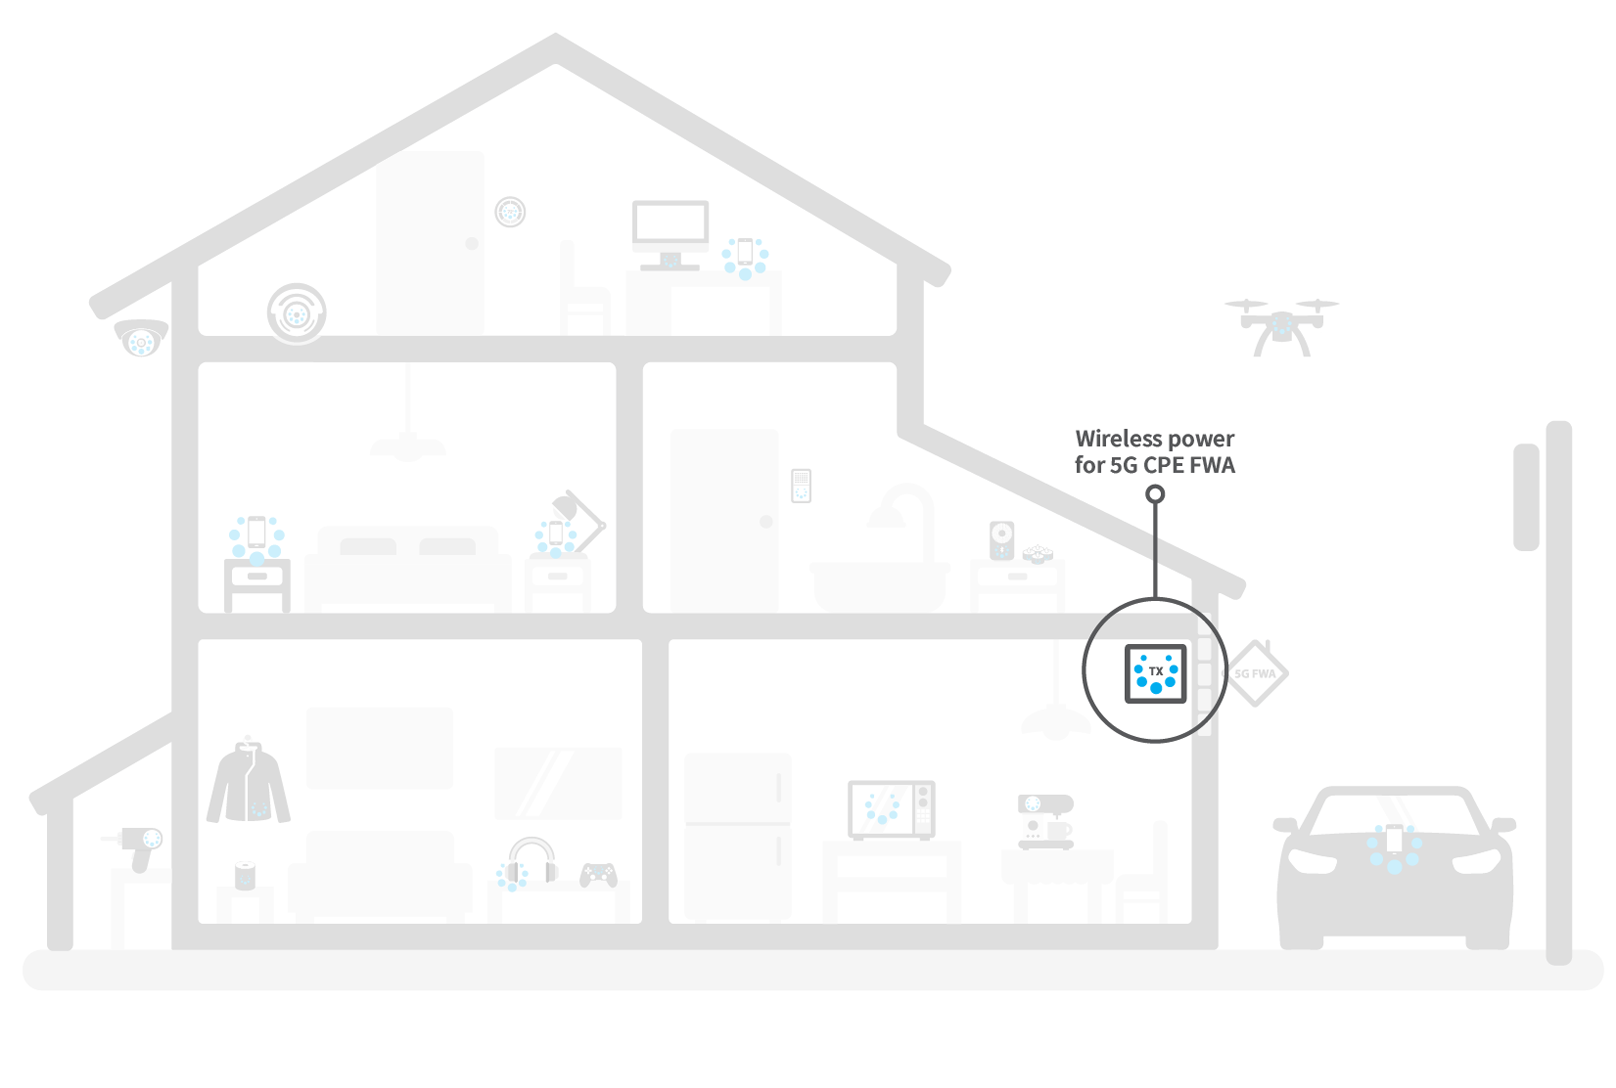 Spark Connected Home - Wireless Power for 5G CPE FWA